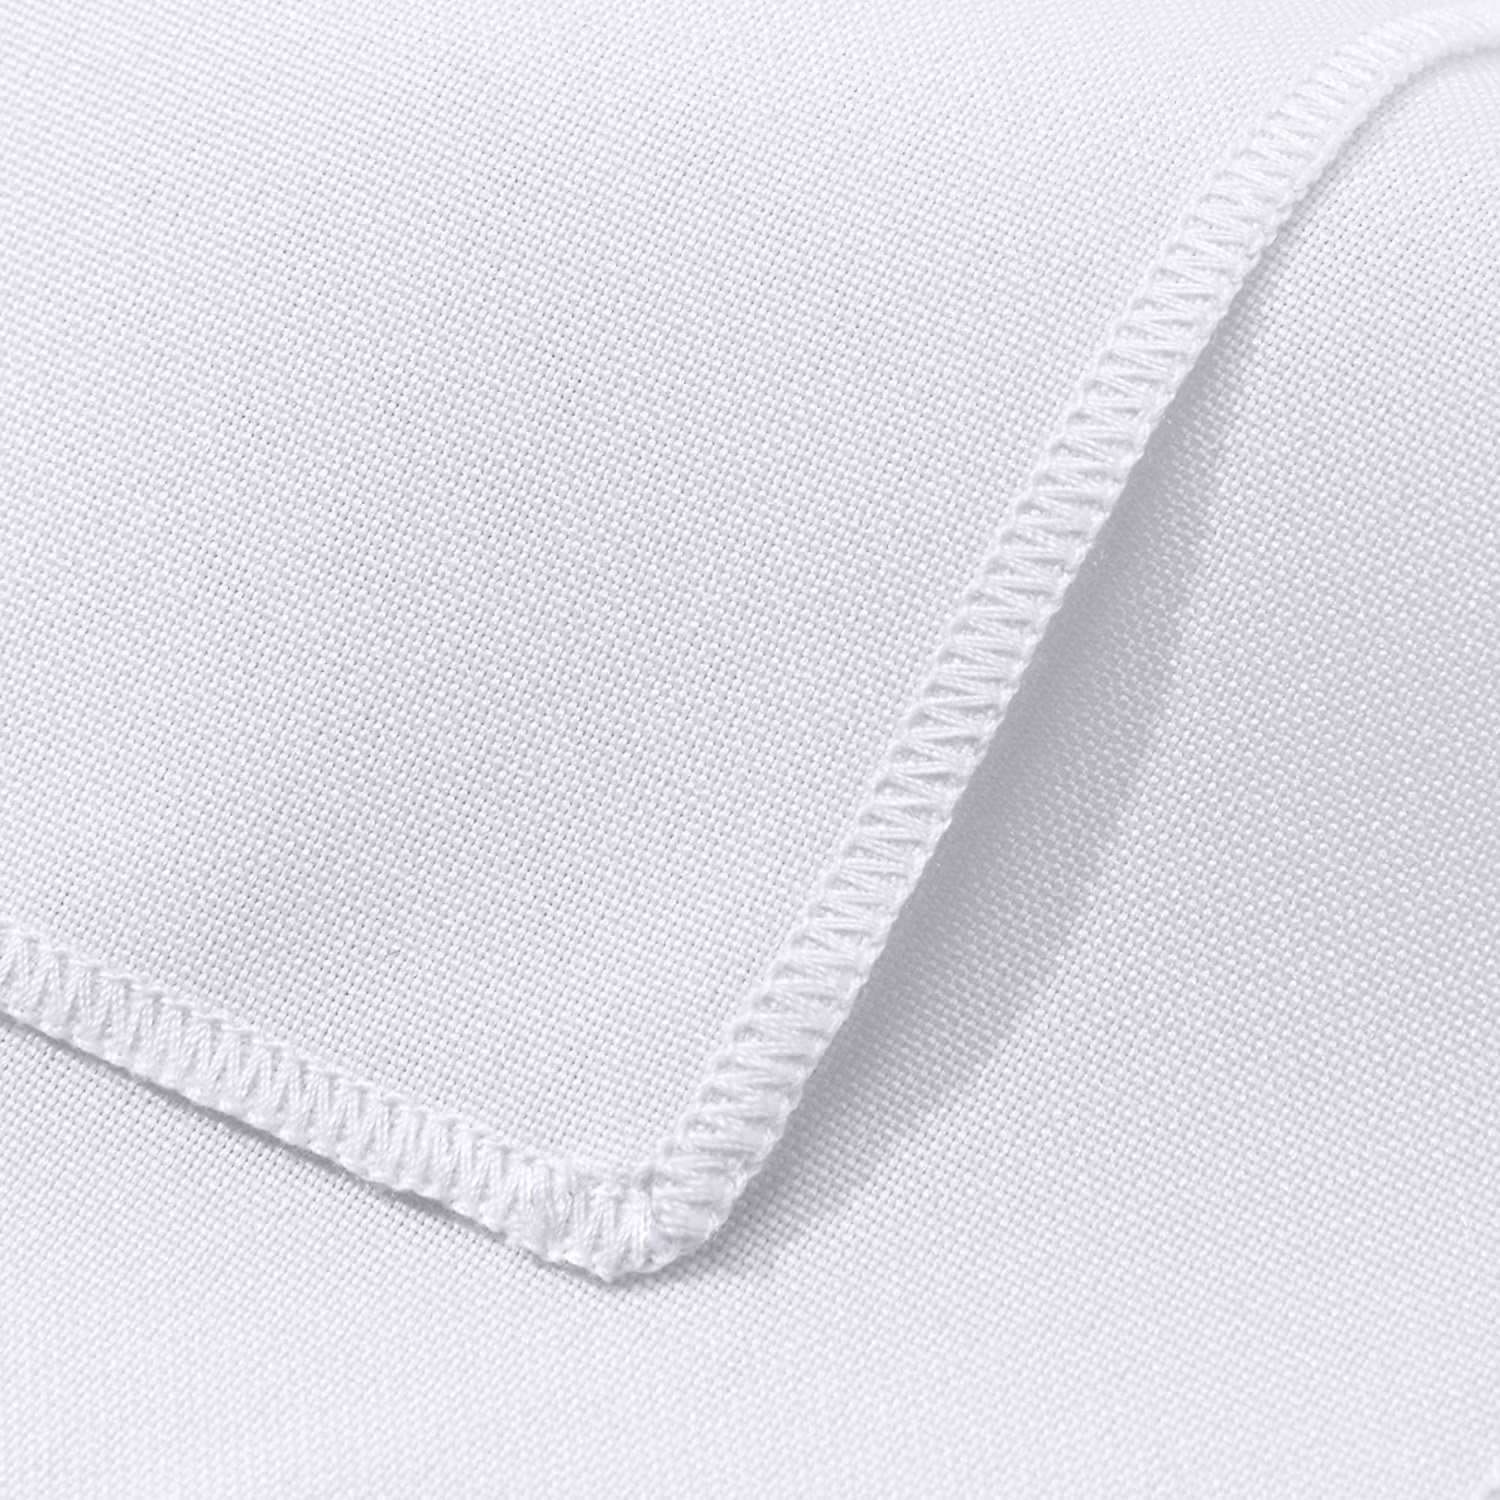 LA Linen Best Seller Products Tablecloth Napkin Table Runner